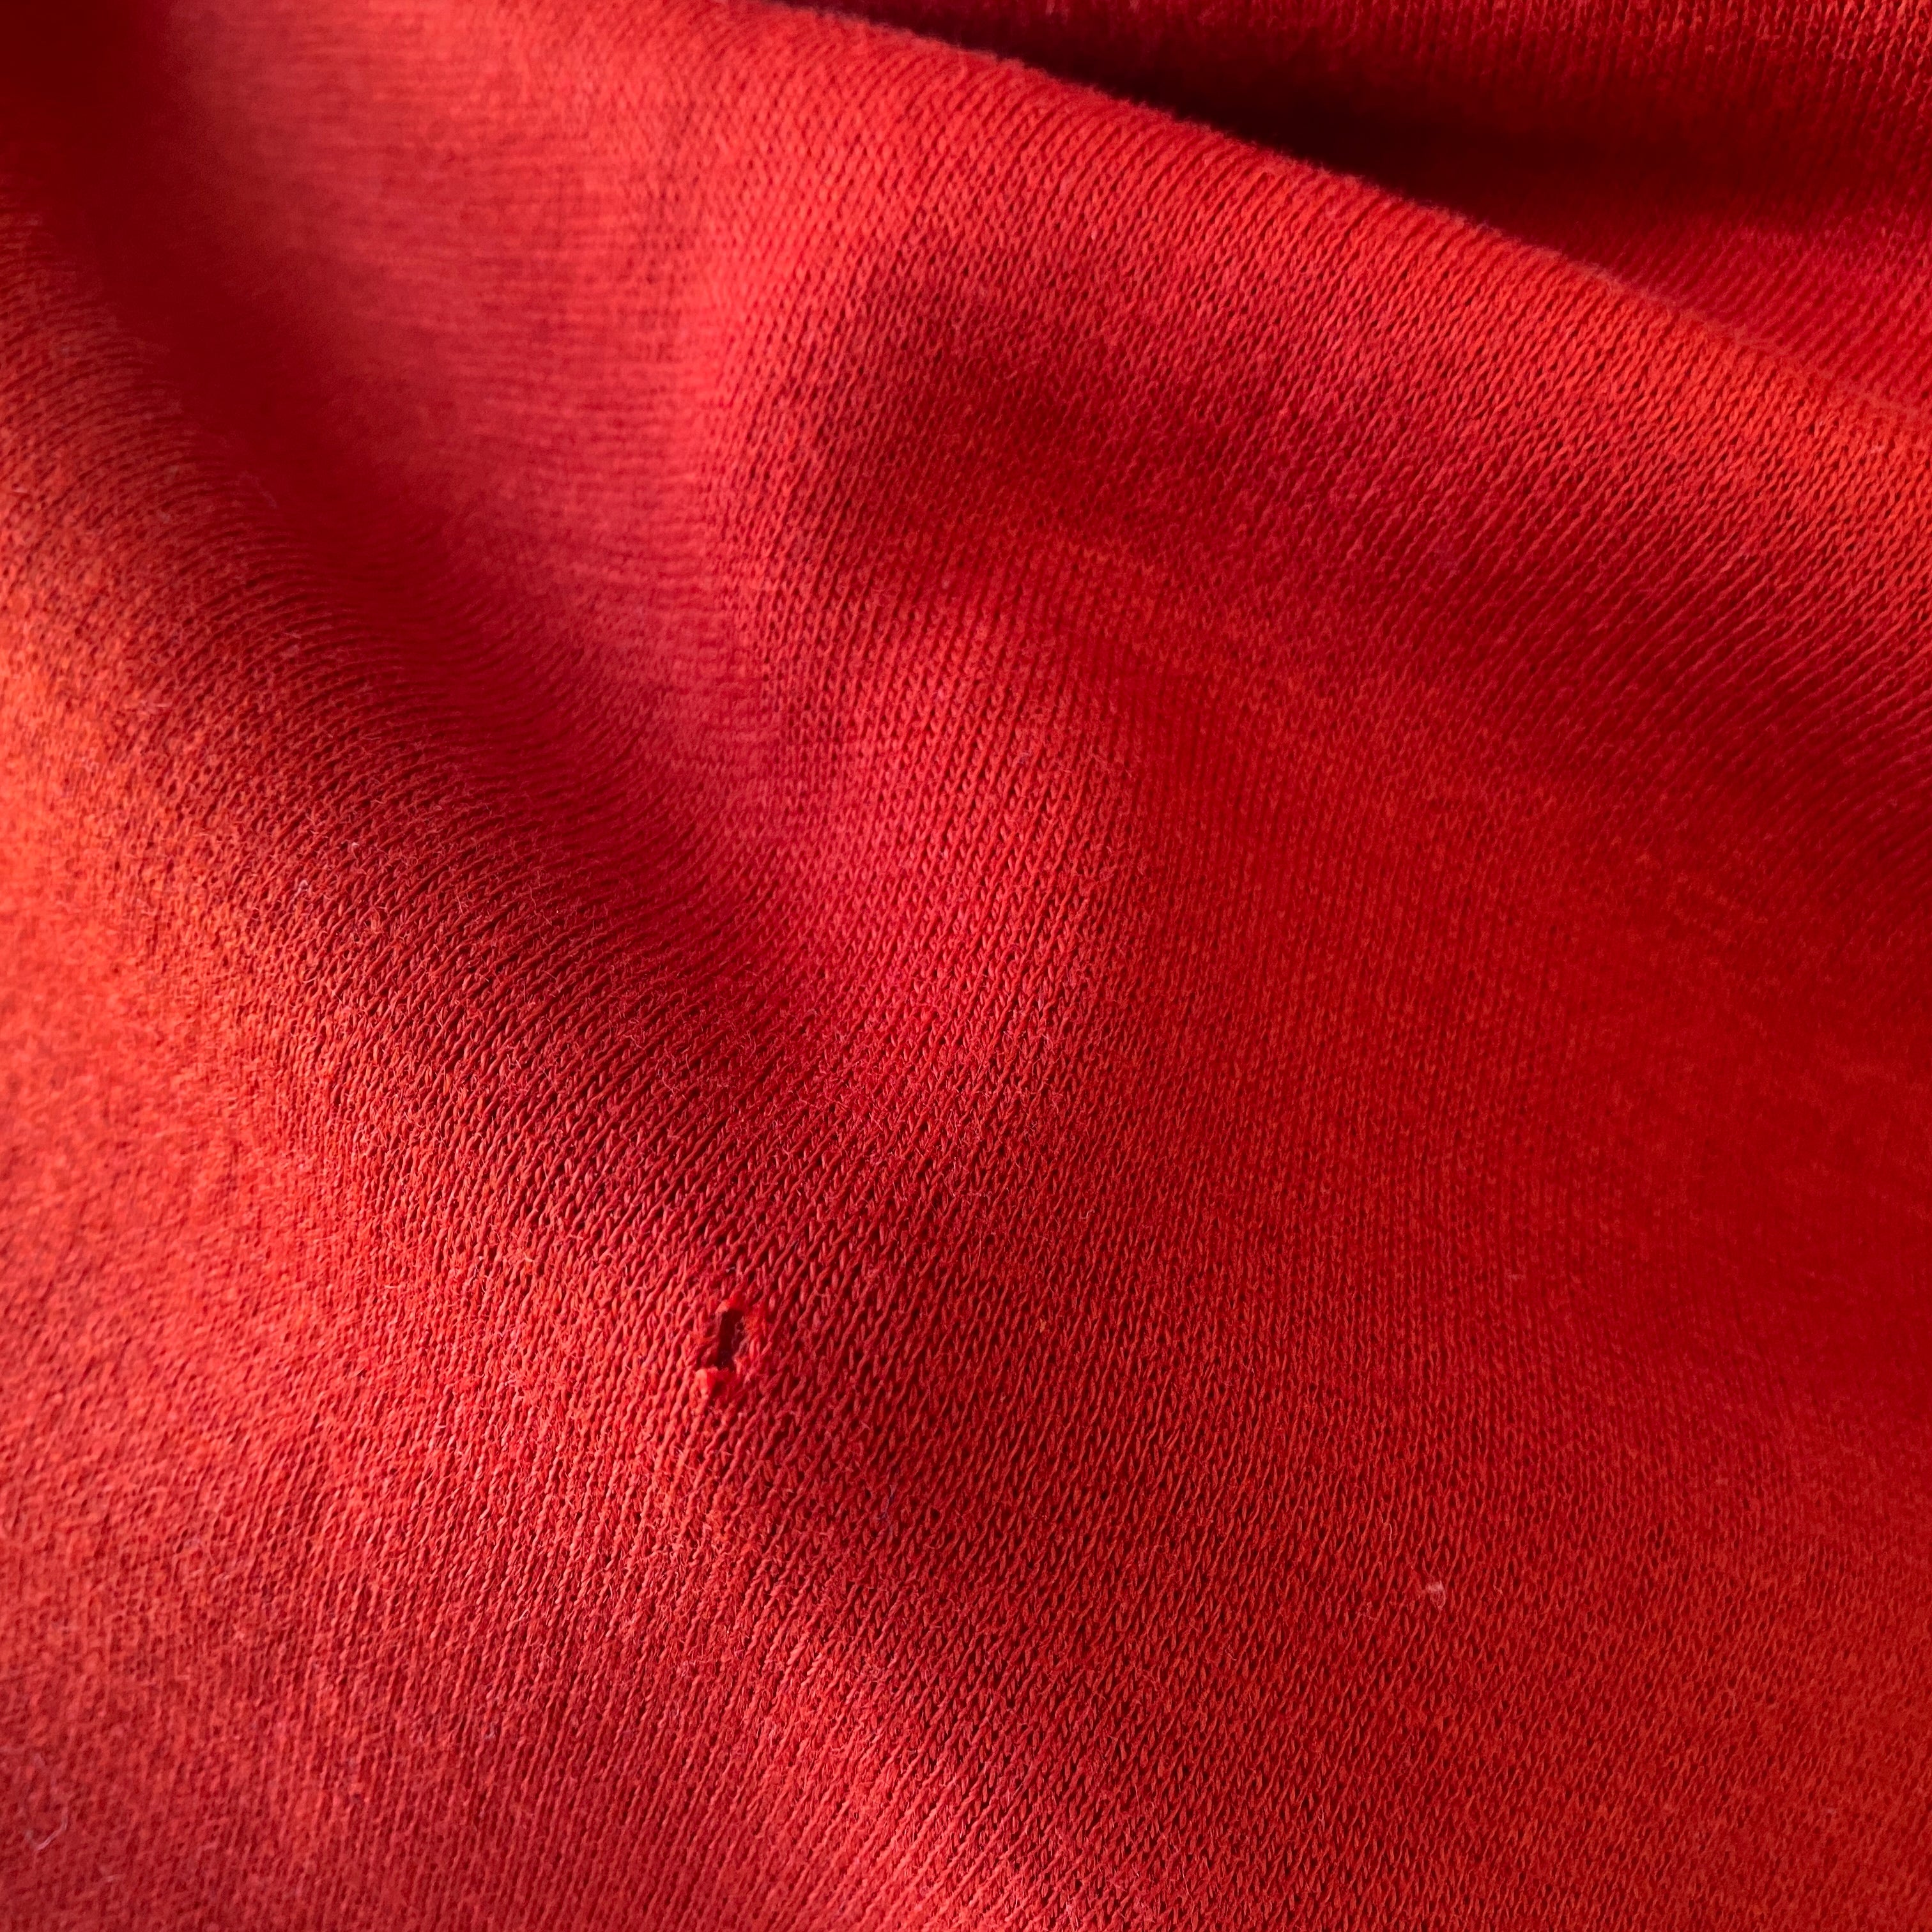 1960/70s SUPER DUPER SOFT AND SLOUCHY Rusty Red Warm Up